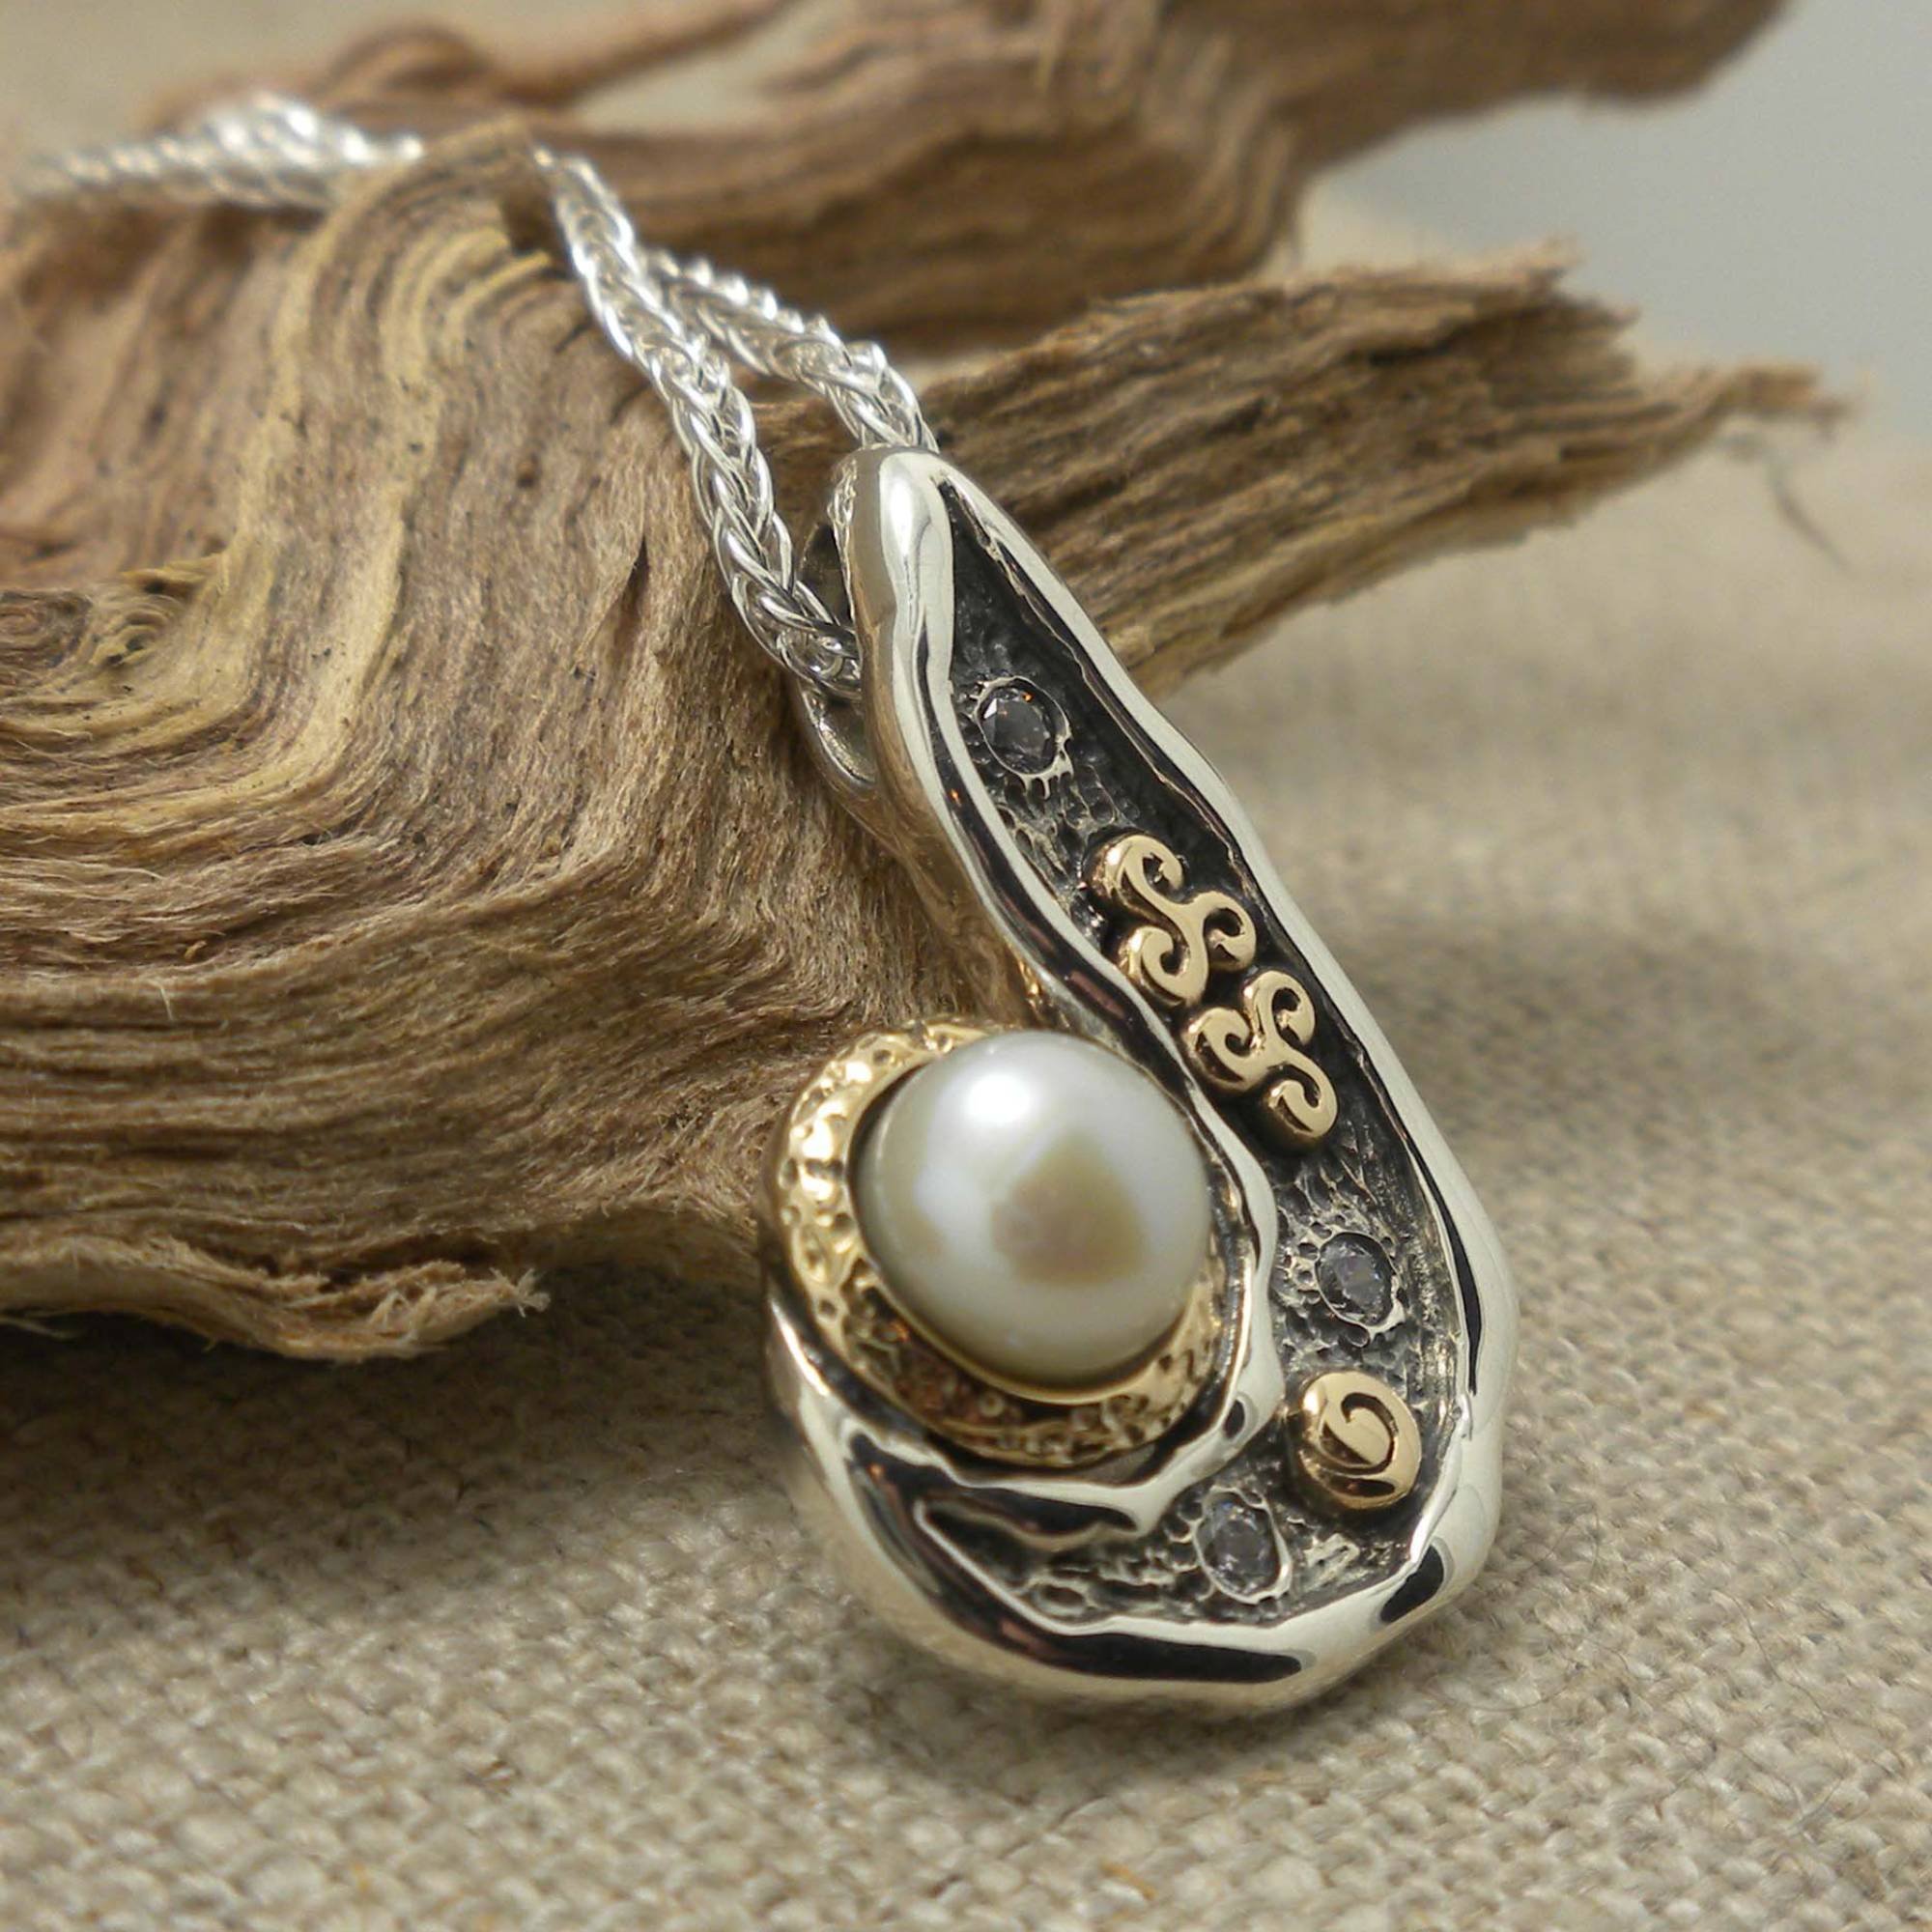 Trinity Knot Pendant by Freshwater Pearl